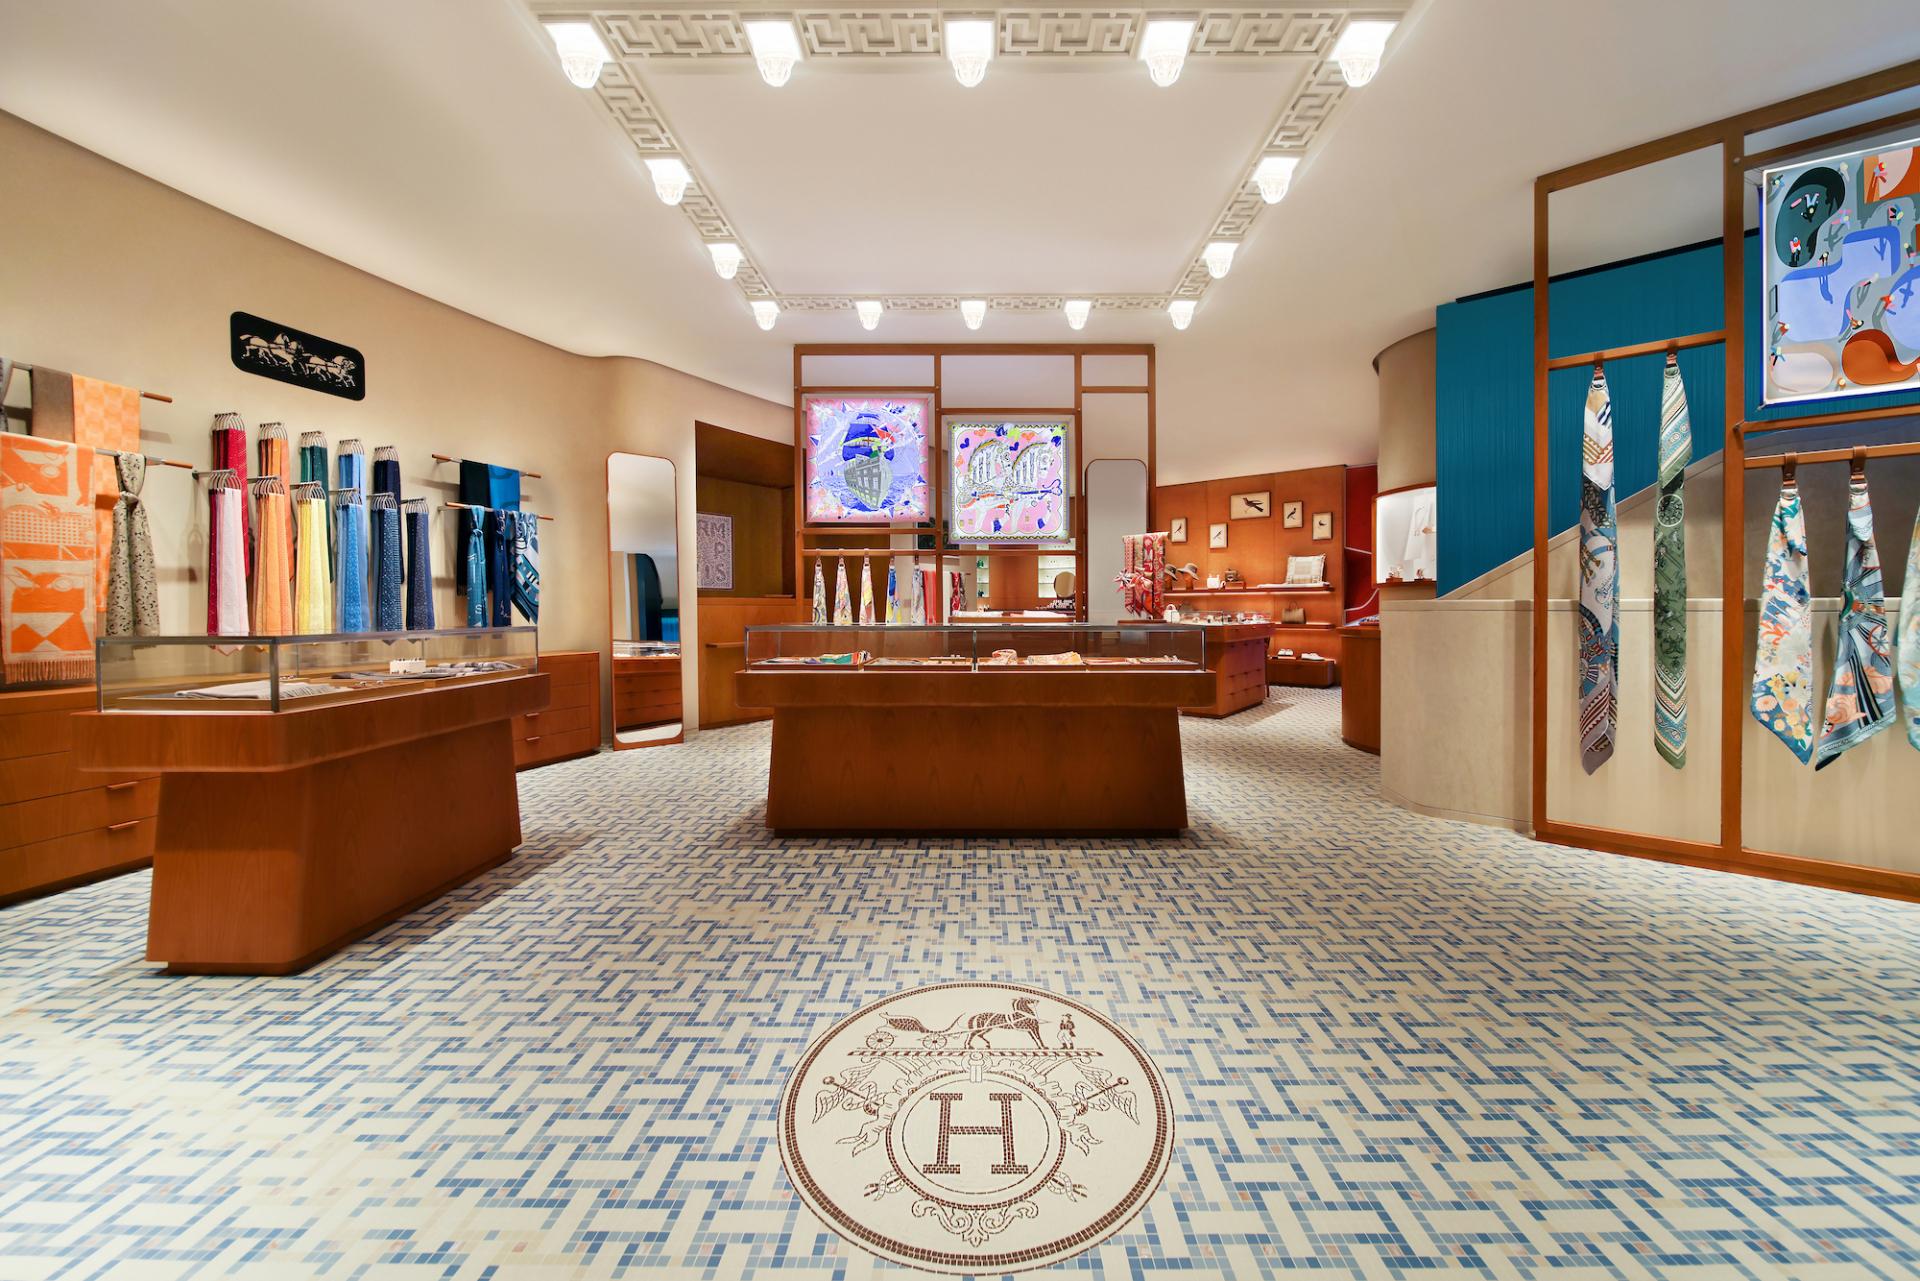 Hermès' Long-time Collaborator RDAI on French Design and the Maison's Refurbished Hong Kong Store